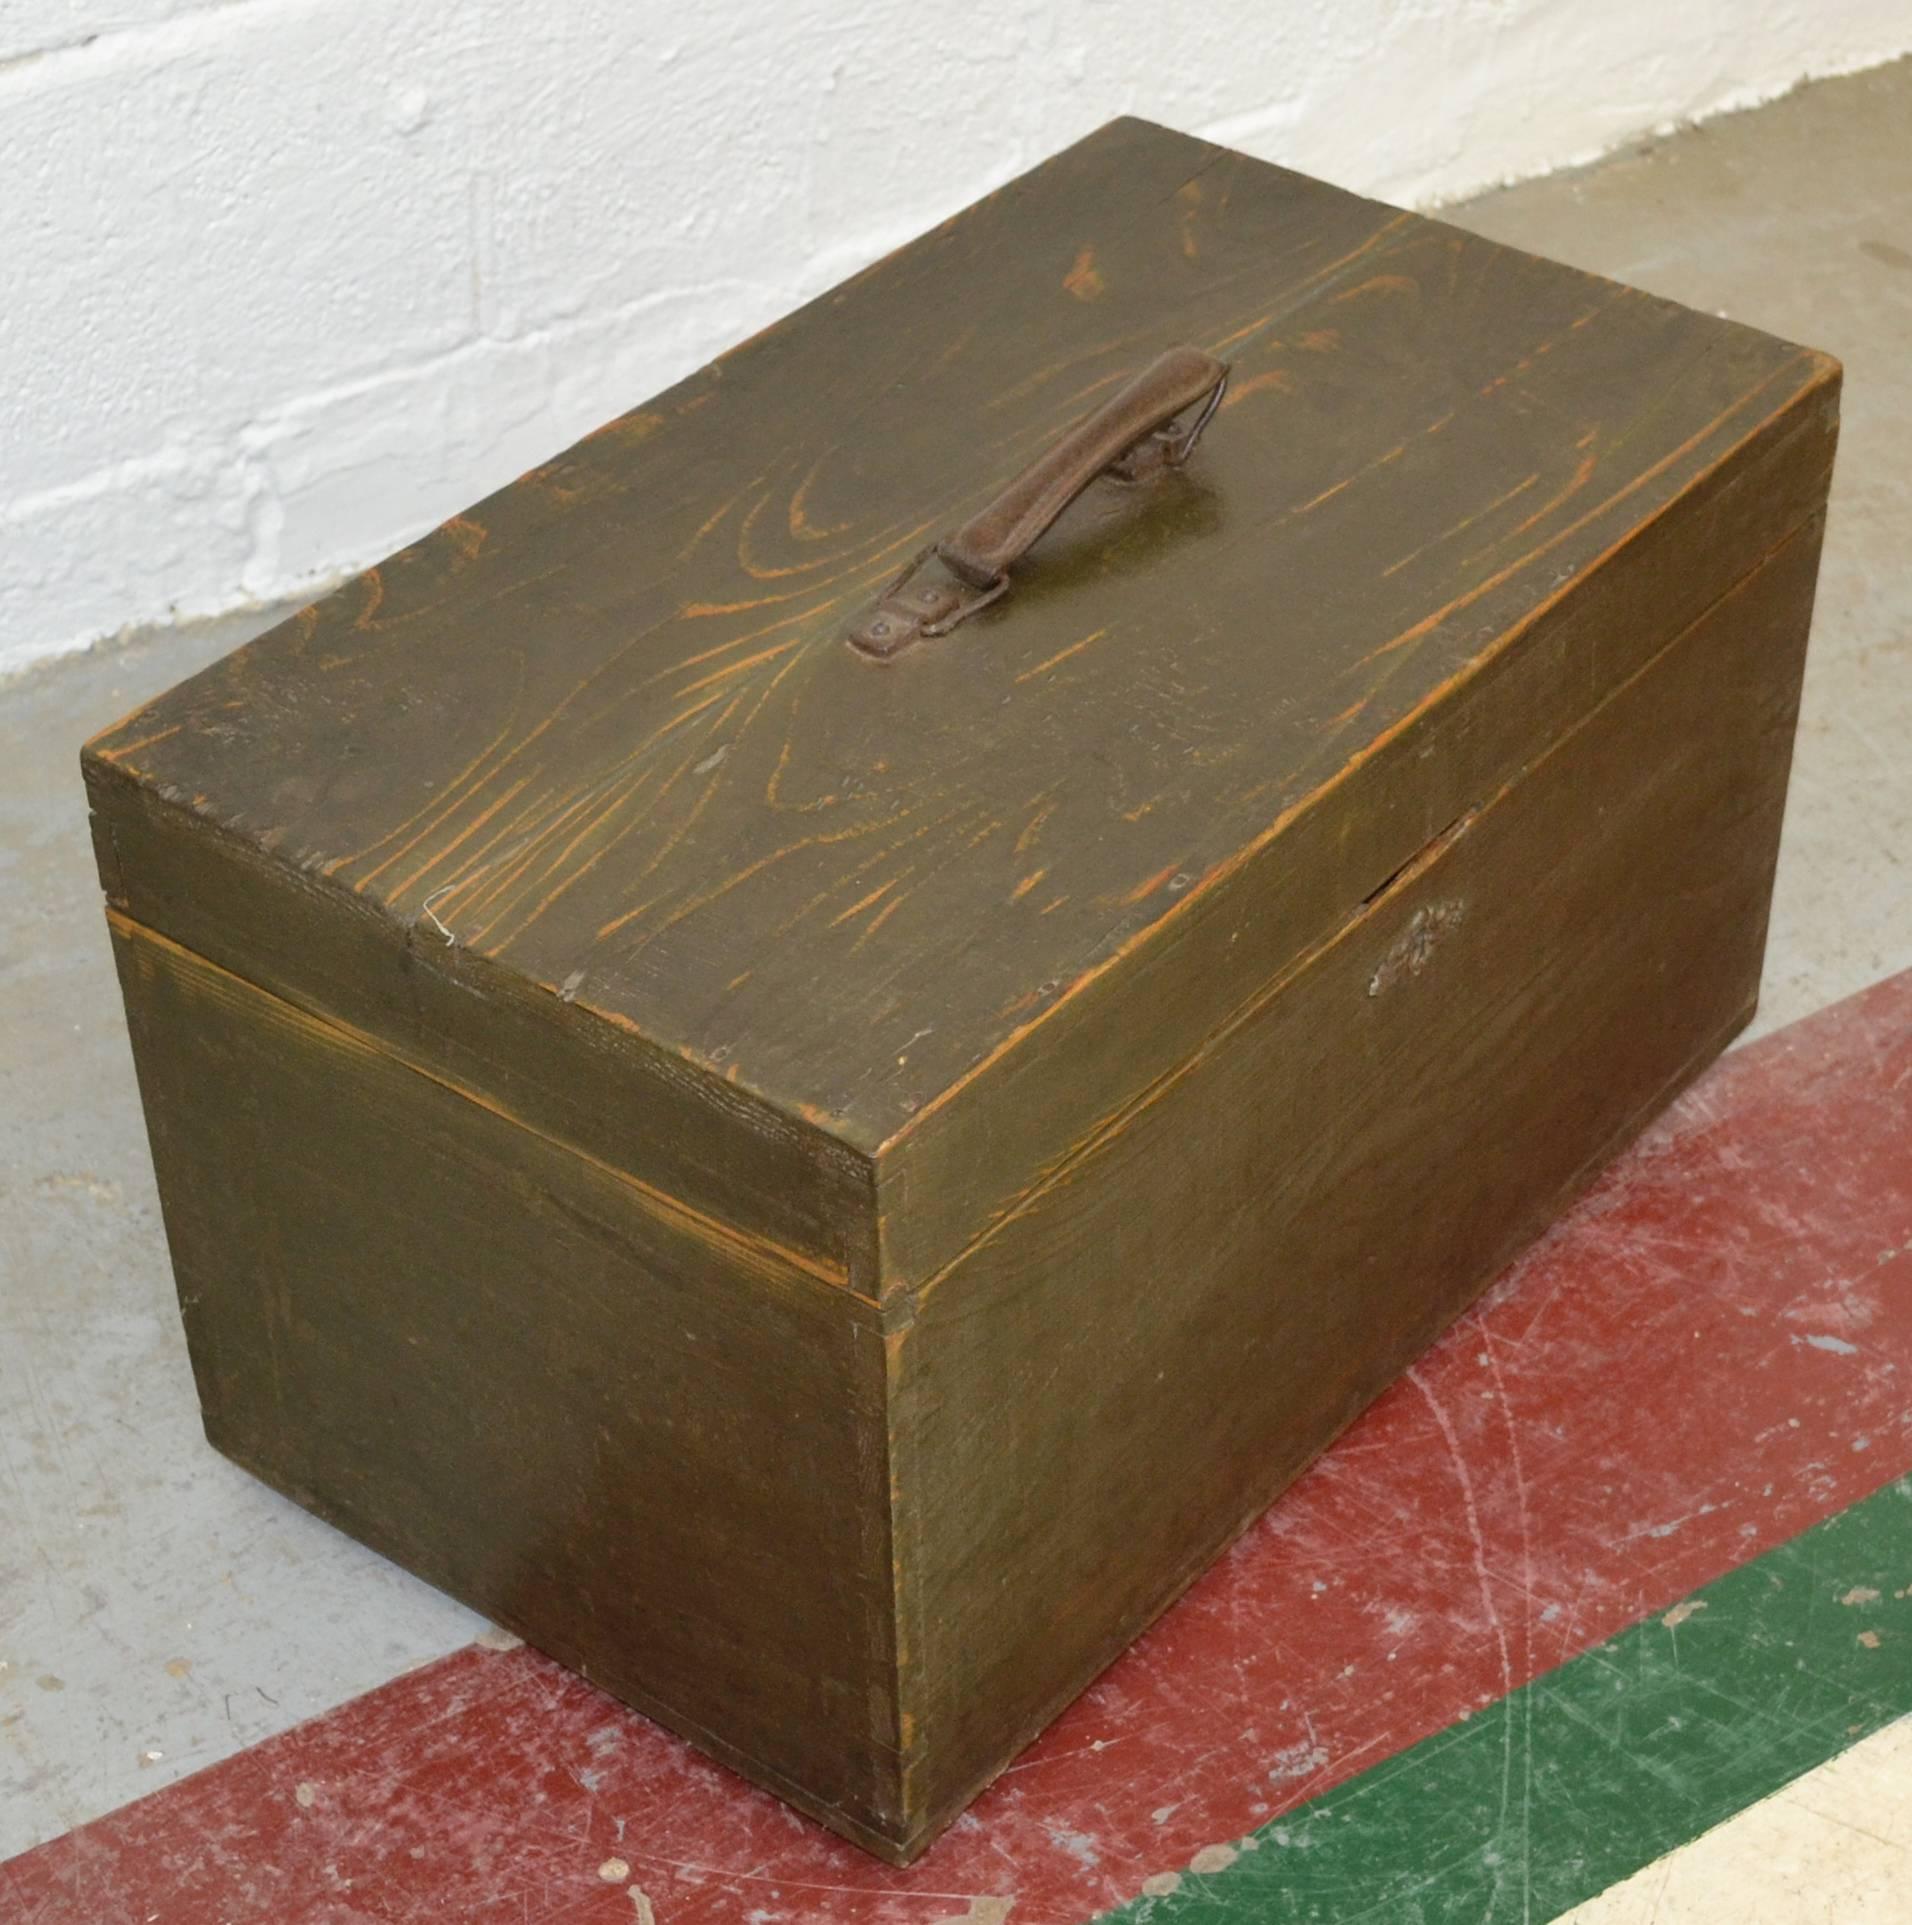 A handsome vintage pine army box with a leather handle, pressed zinc escutcheon, and a great patina. In old very dark green paint.